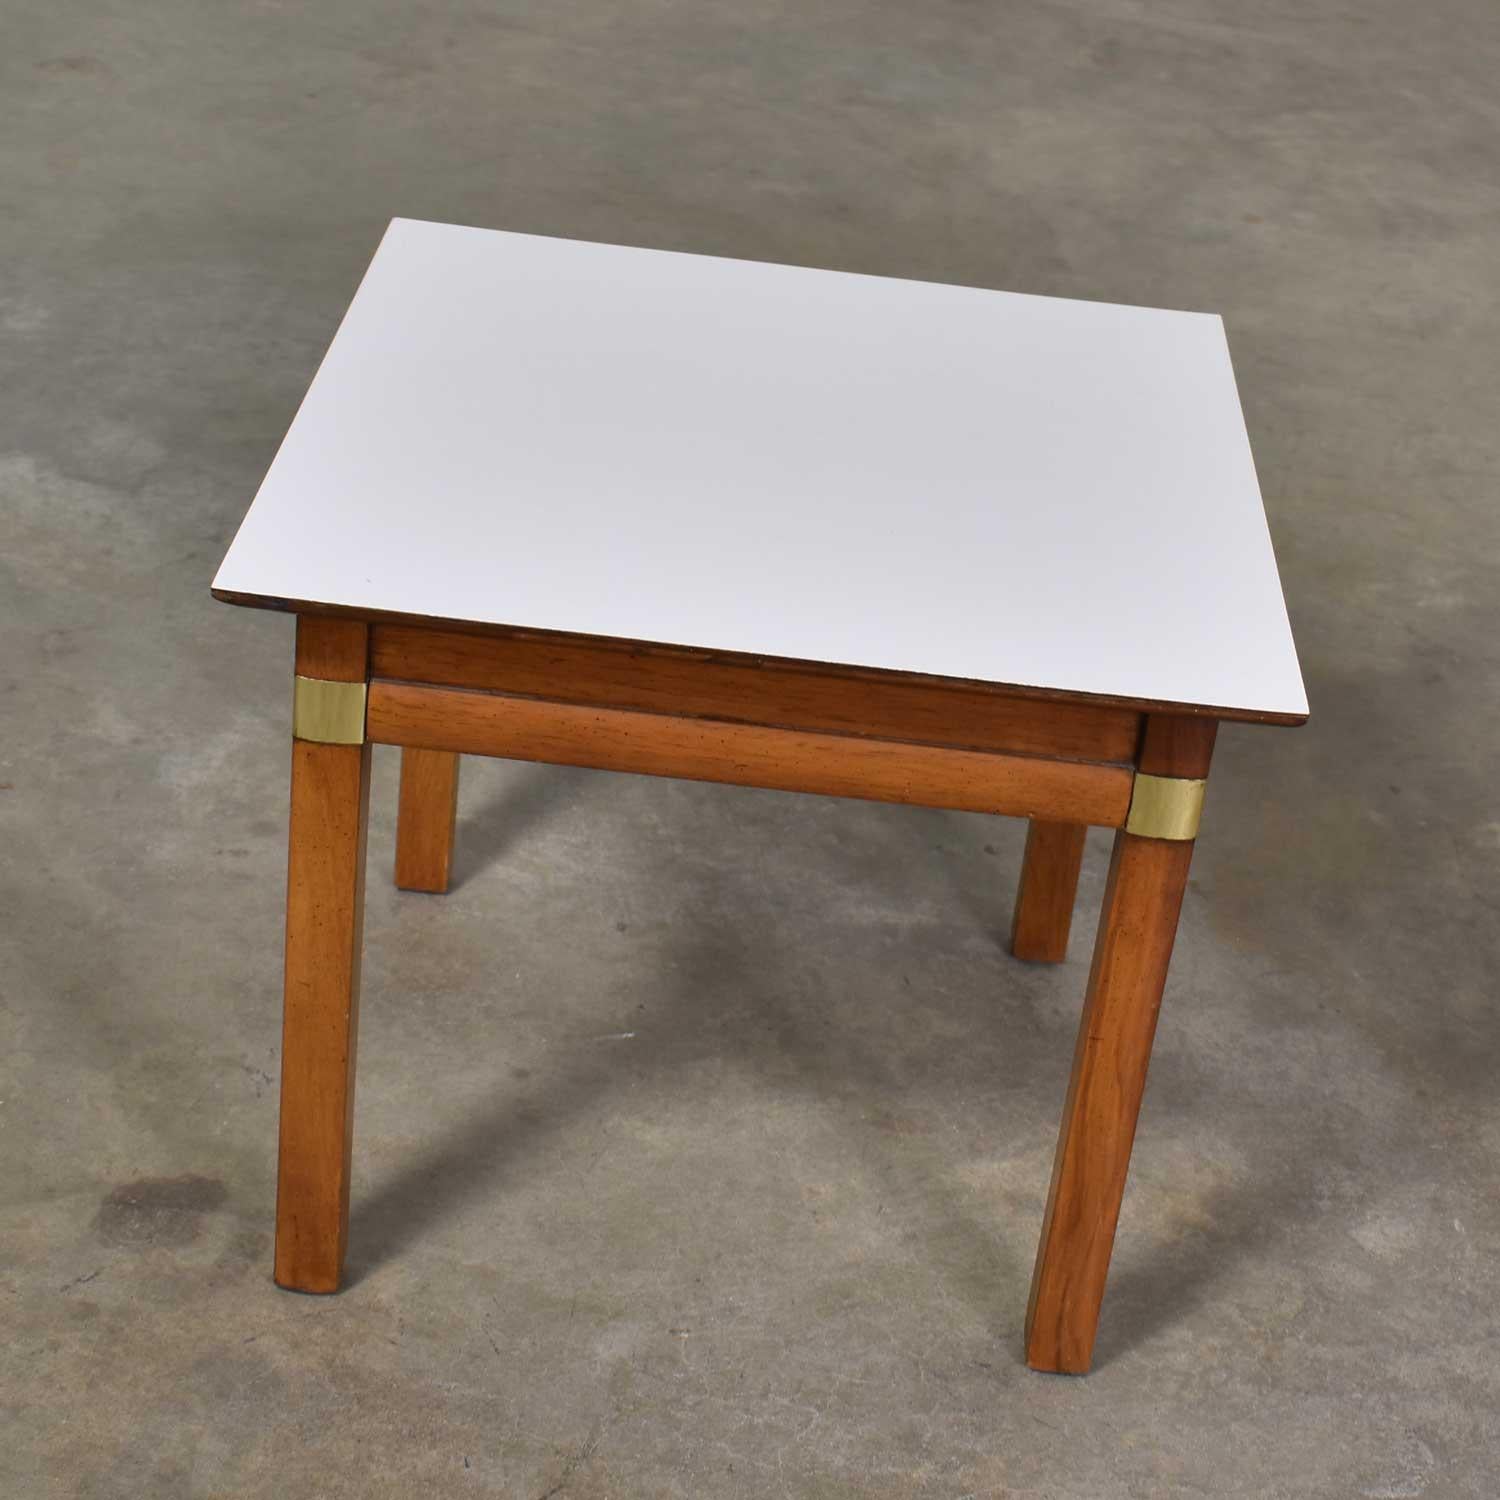 Handsome and useful small square campaign style side, end, or occasional table with a white laminate top made by Hickory Furniture Manufacturing. It is in wonderful vintage condition. The wood does have signs of age but nothing outstanding. Please